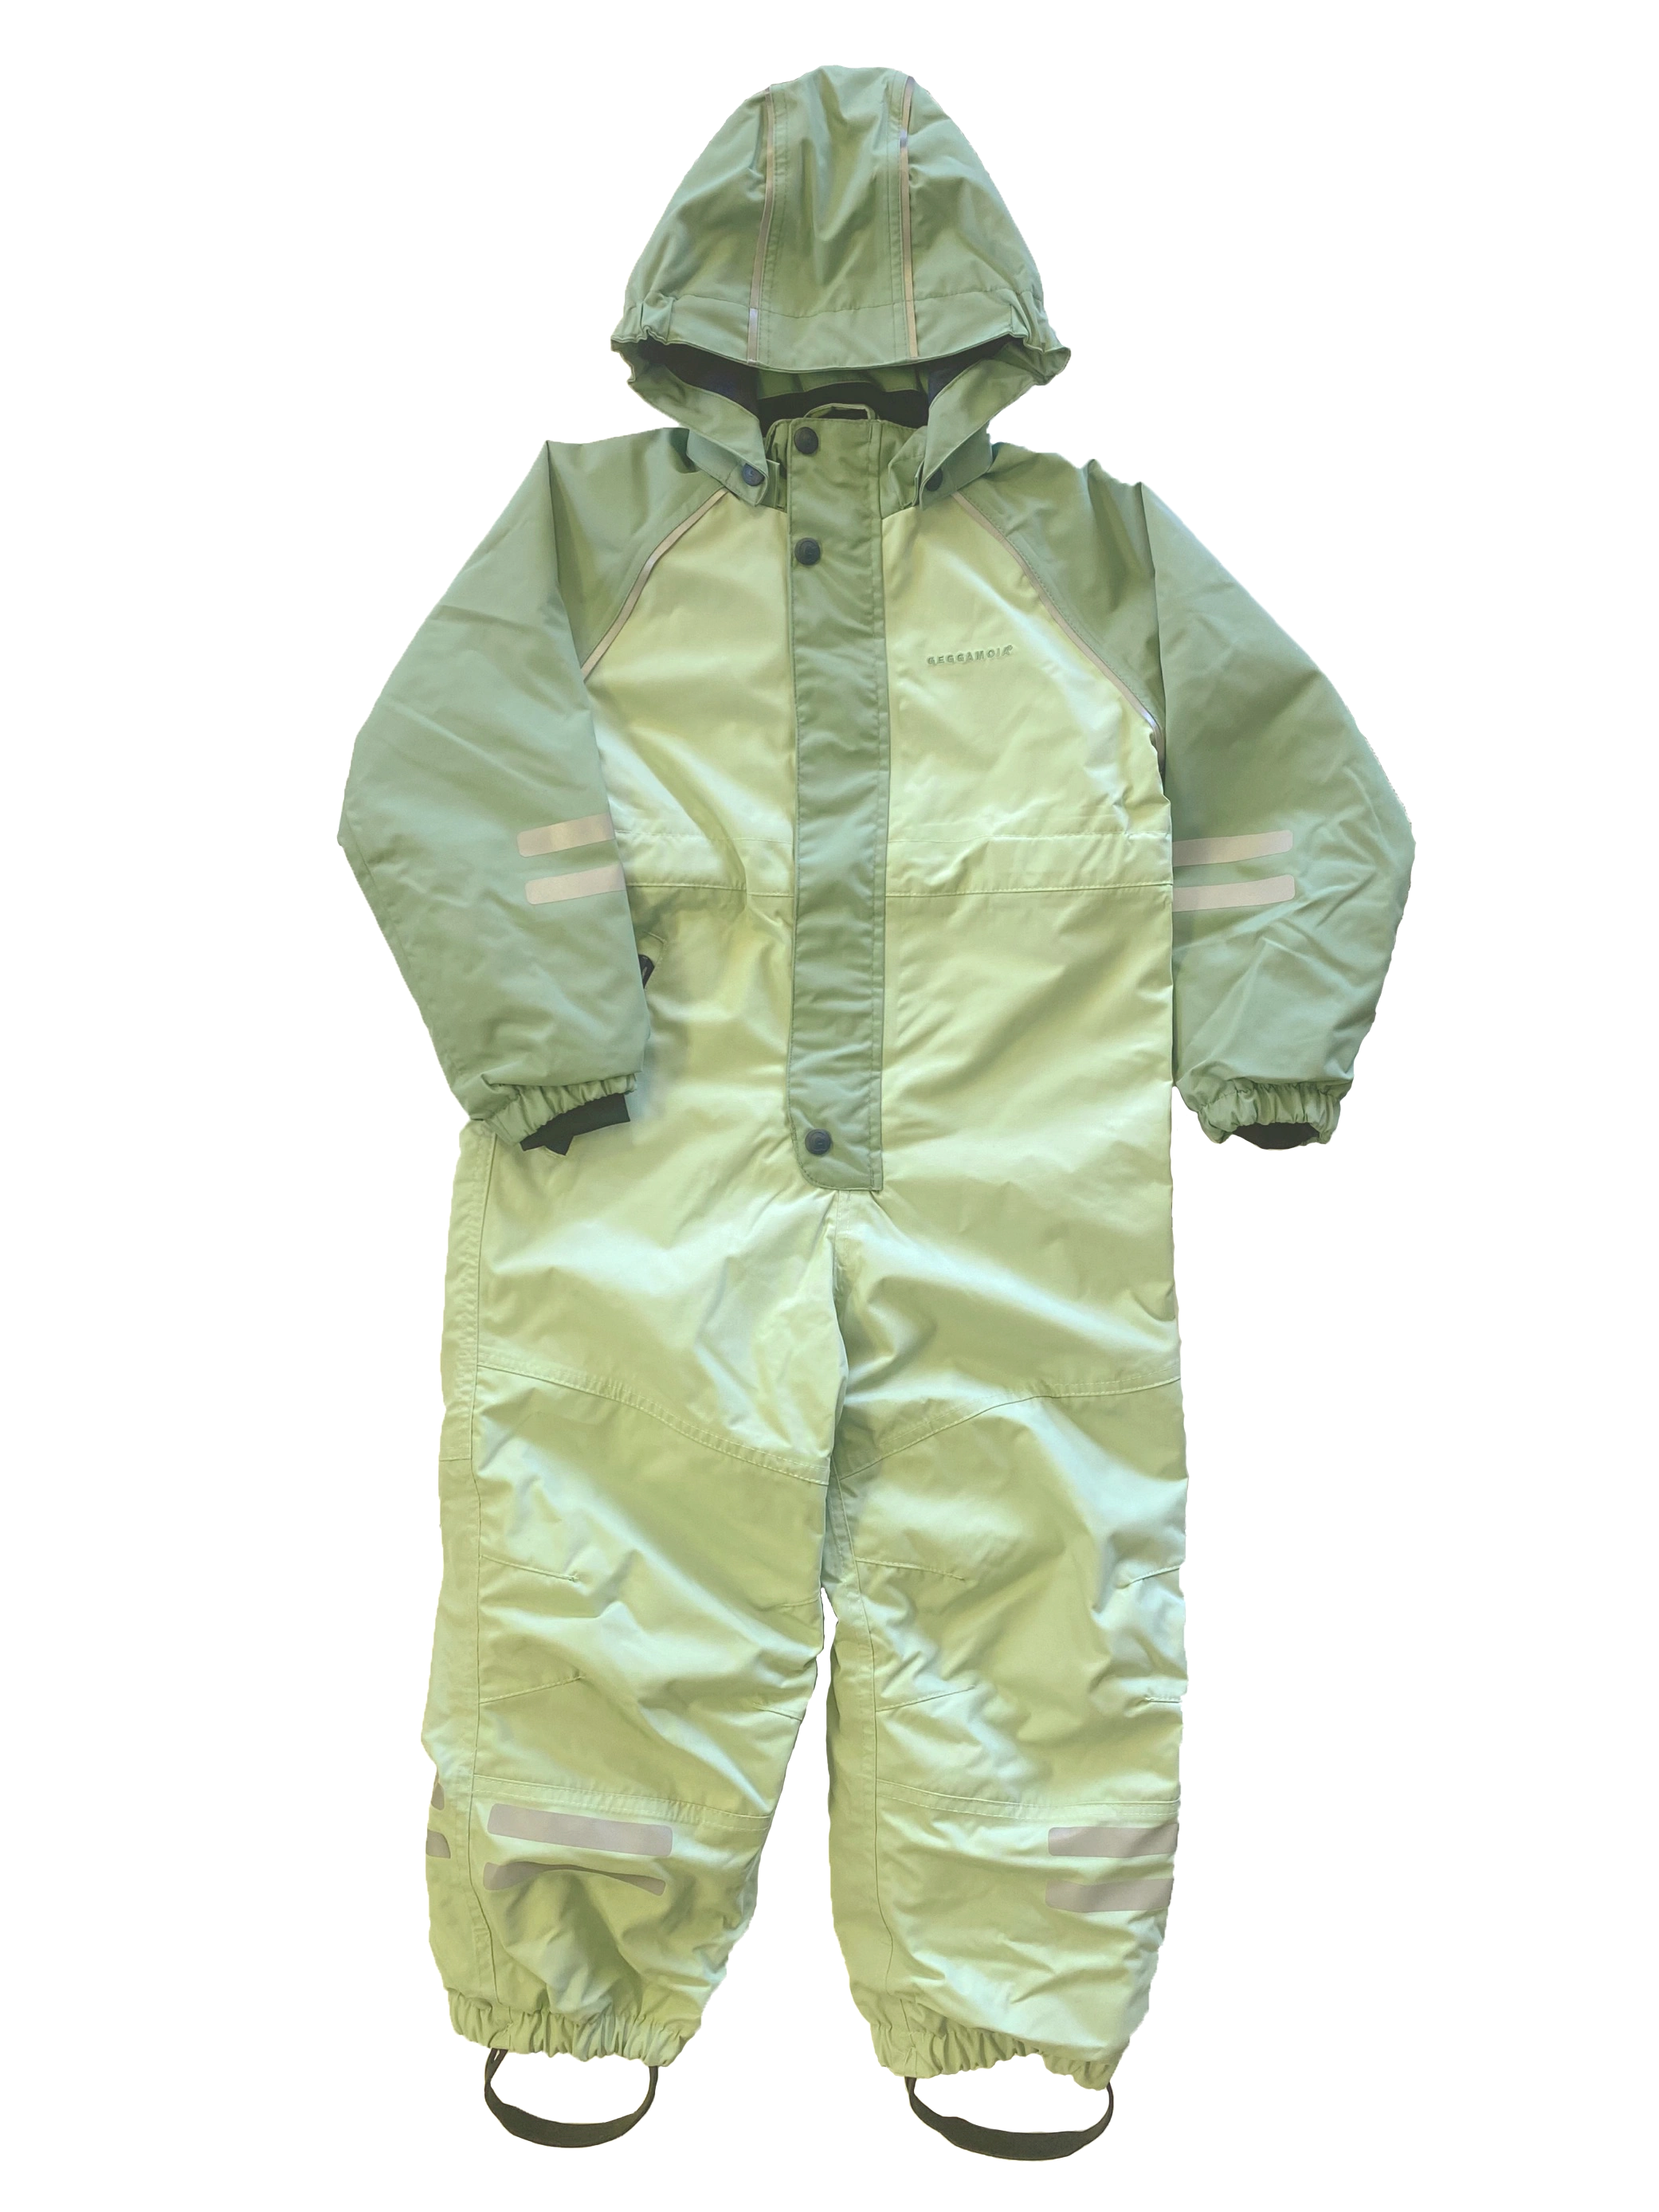 Shell overall Green